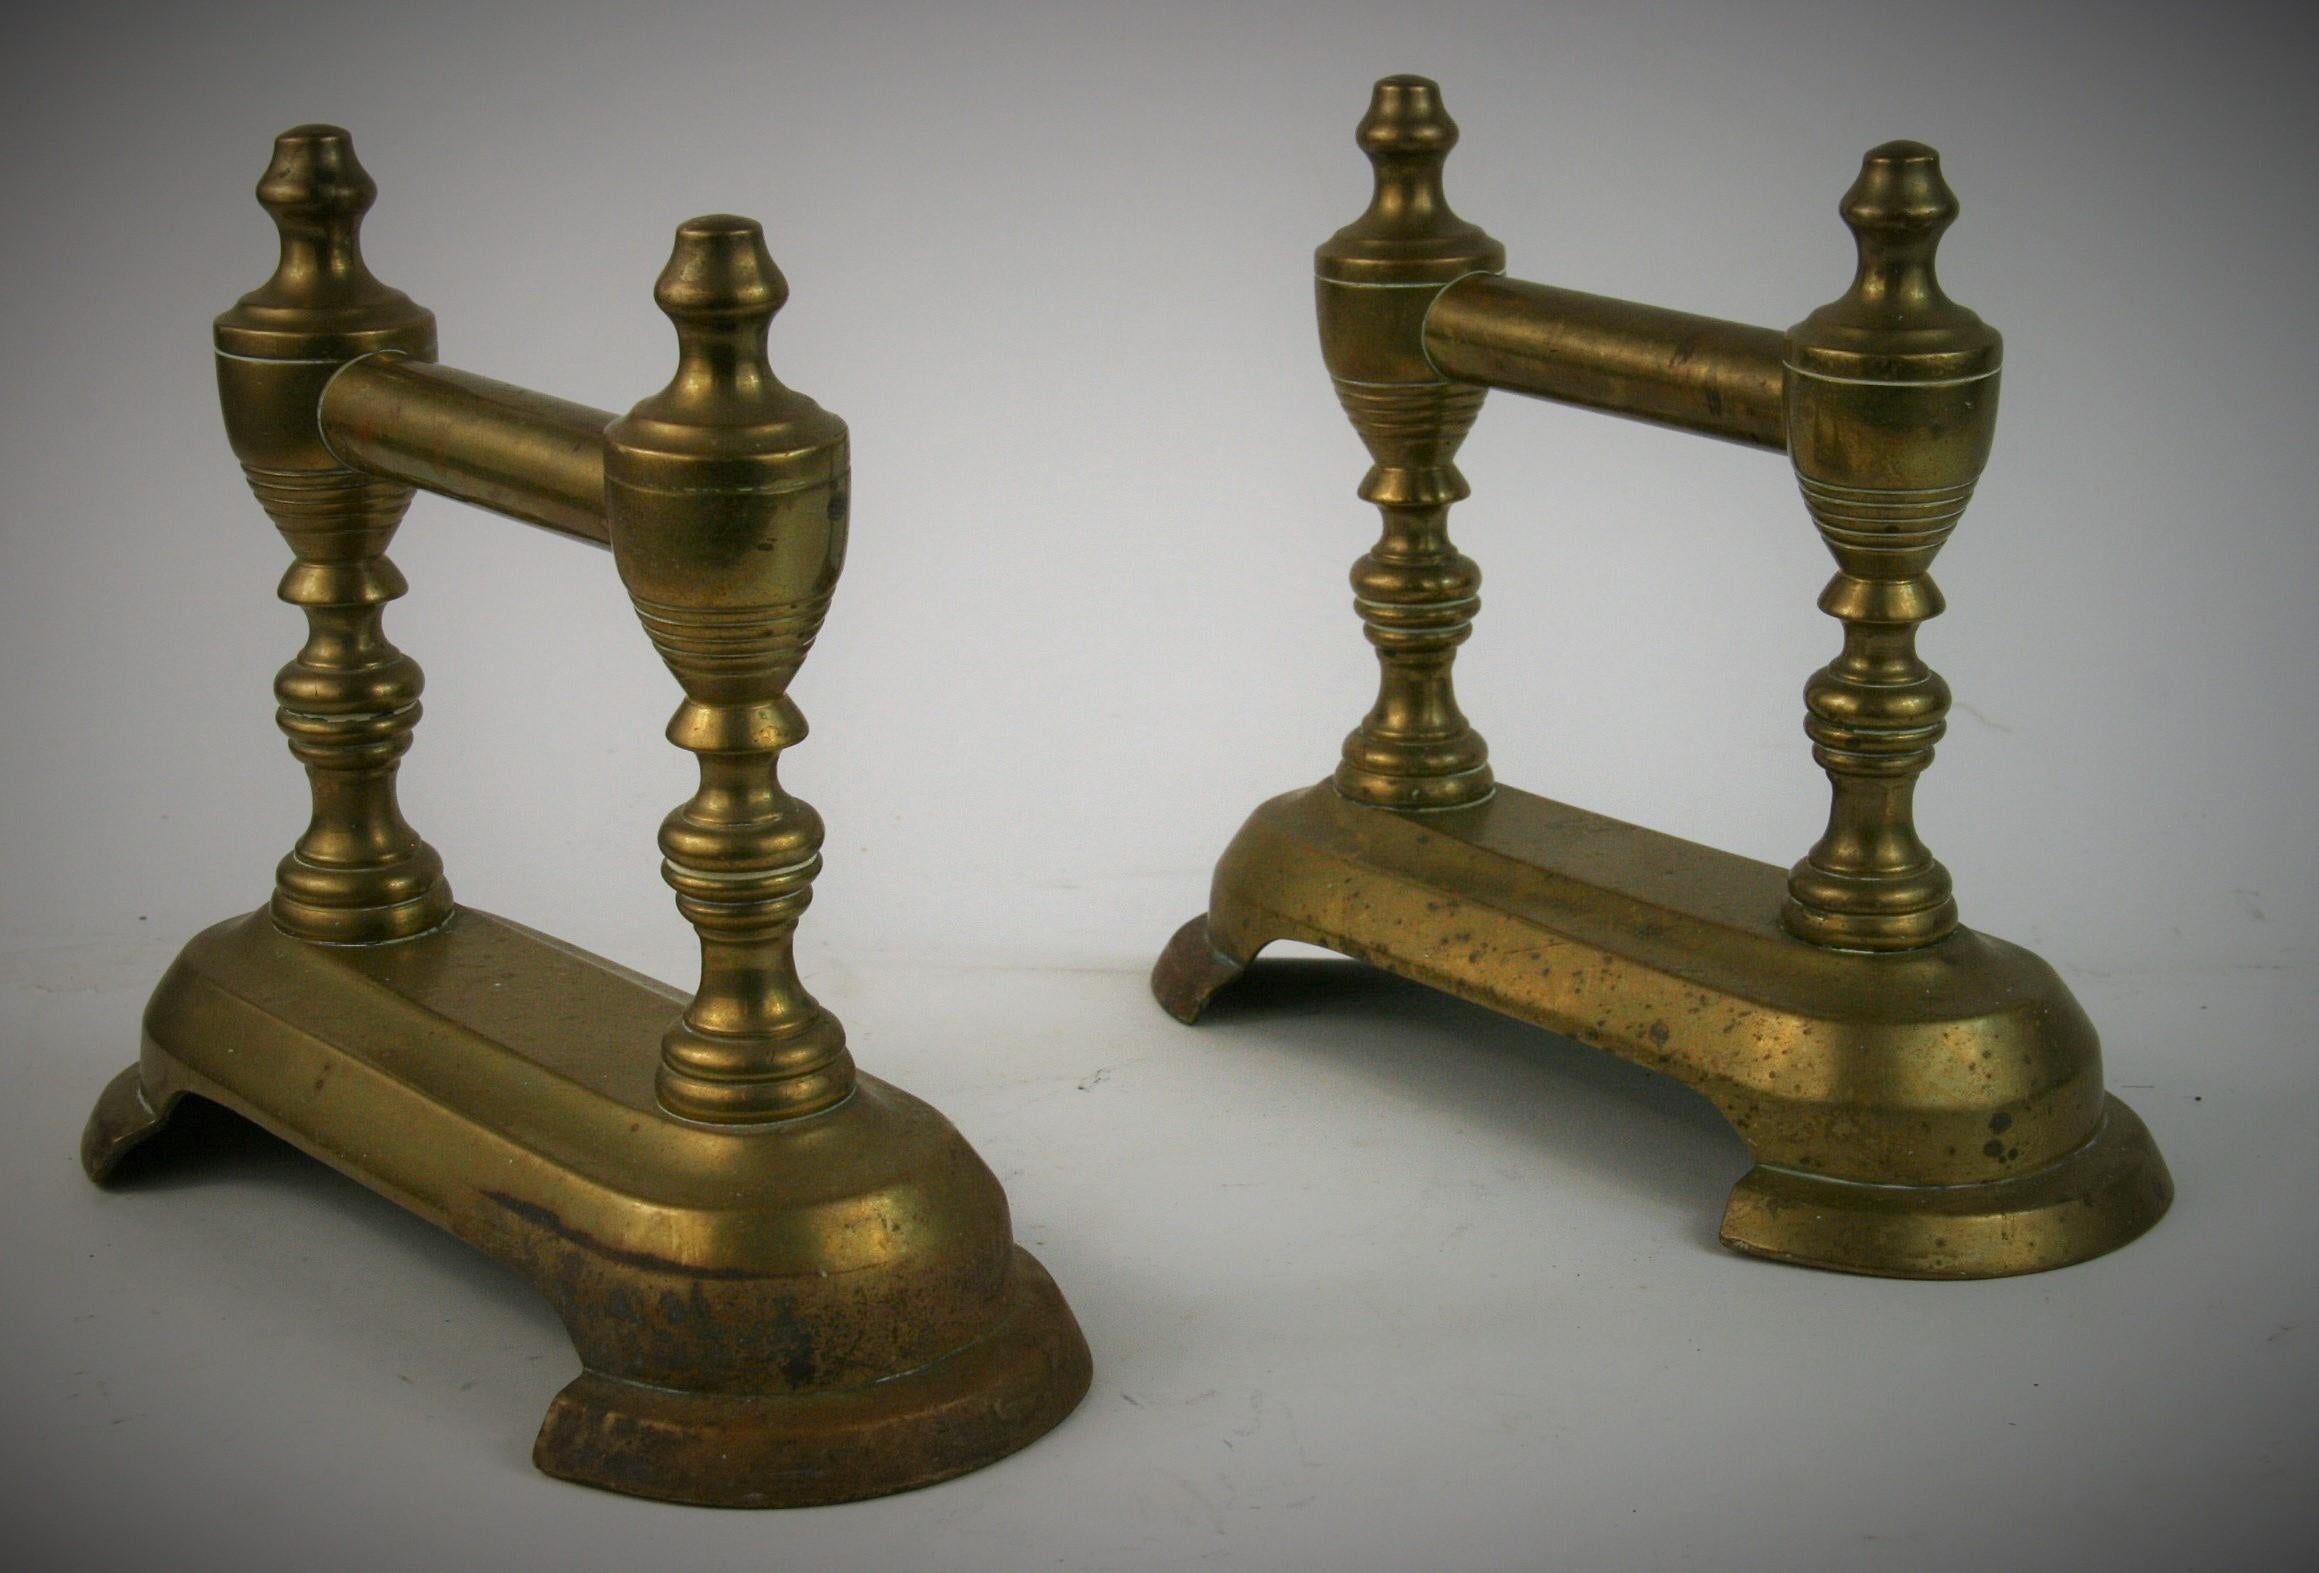 2-316 Pair of English brass fire tool rests late 19th century
Fire Dogs,Chenets,Andirons